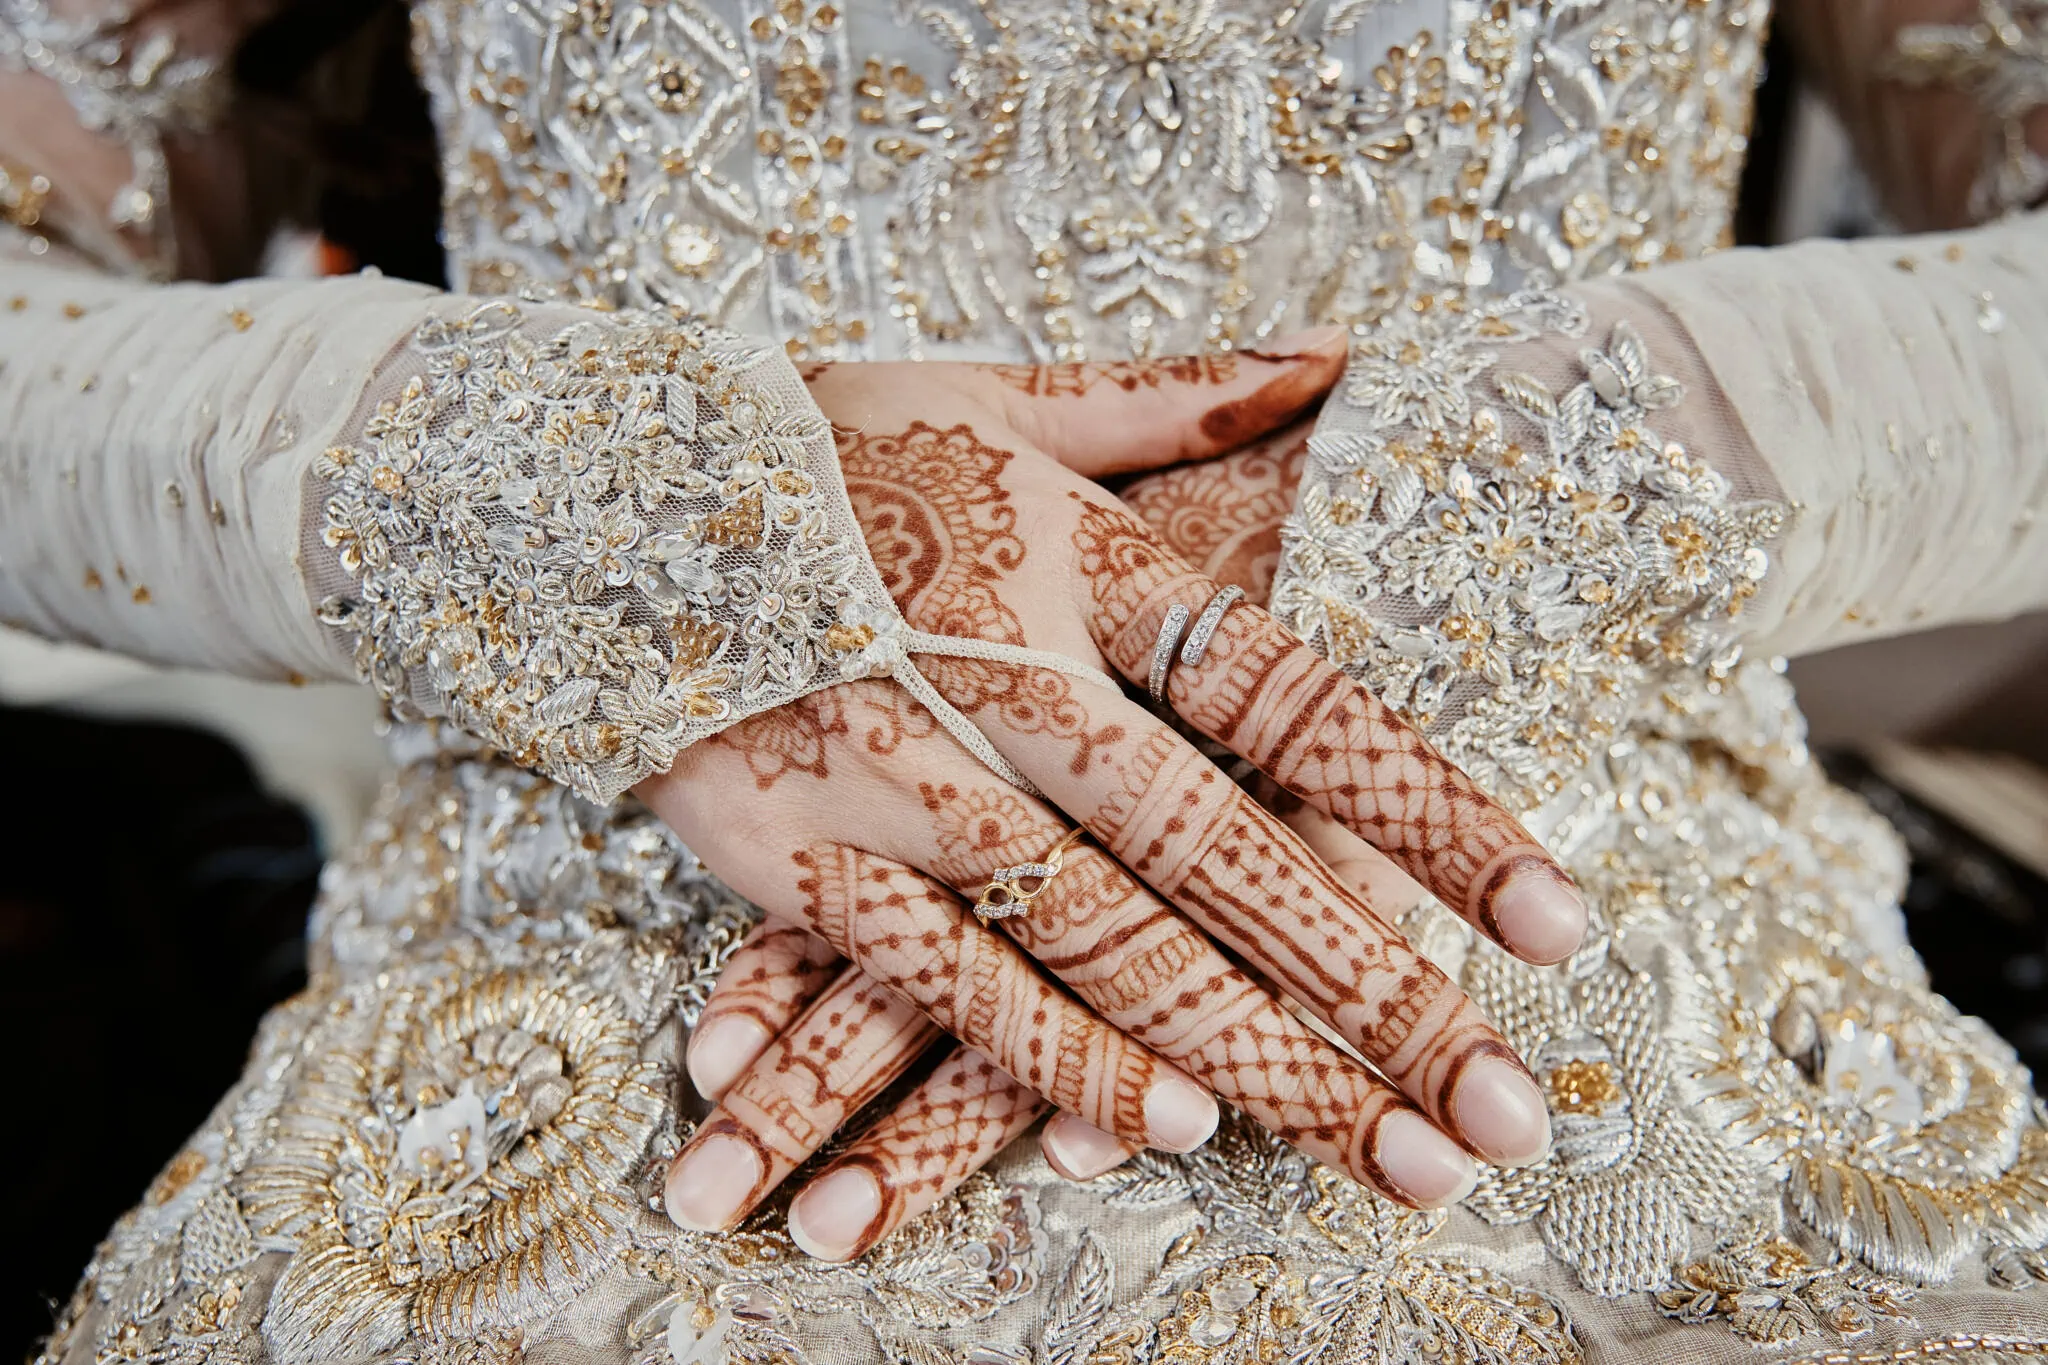 Queenstown New Zealand Elopement Wedding Photographer - A Queenstown Islamic wedding with a bride adorned with henna on her hands.